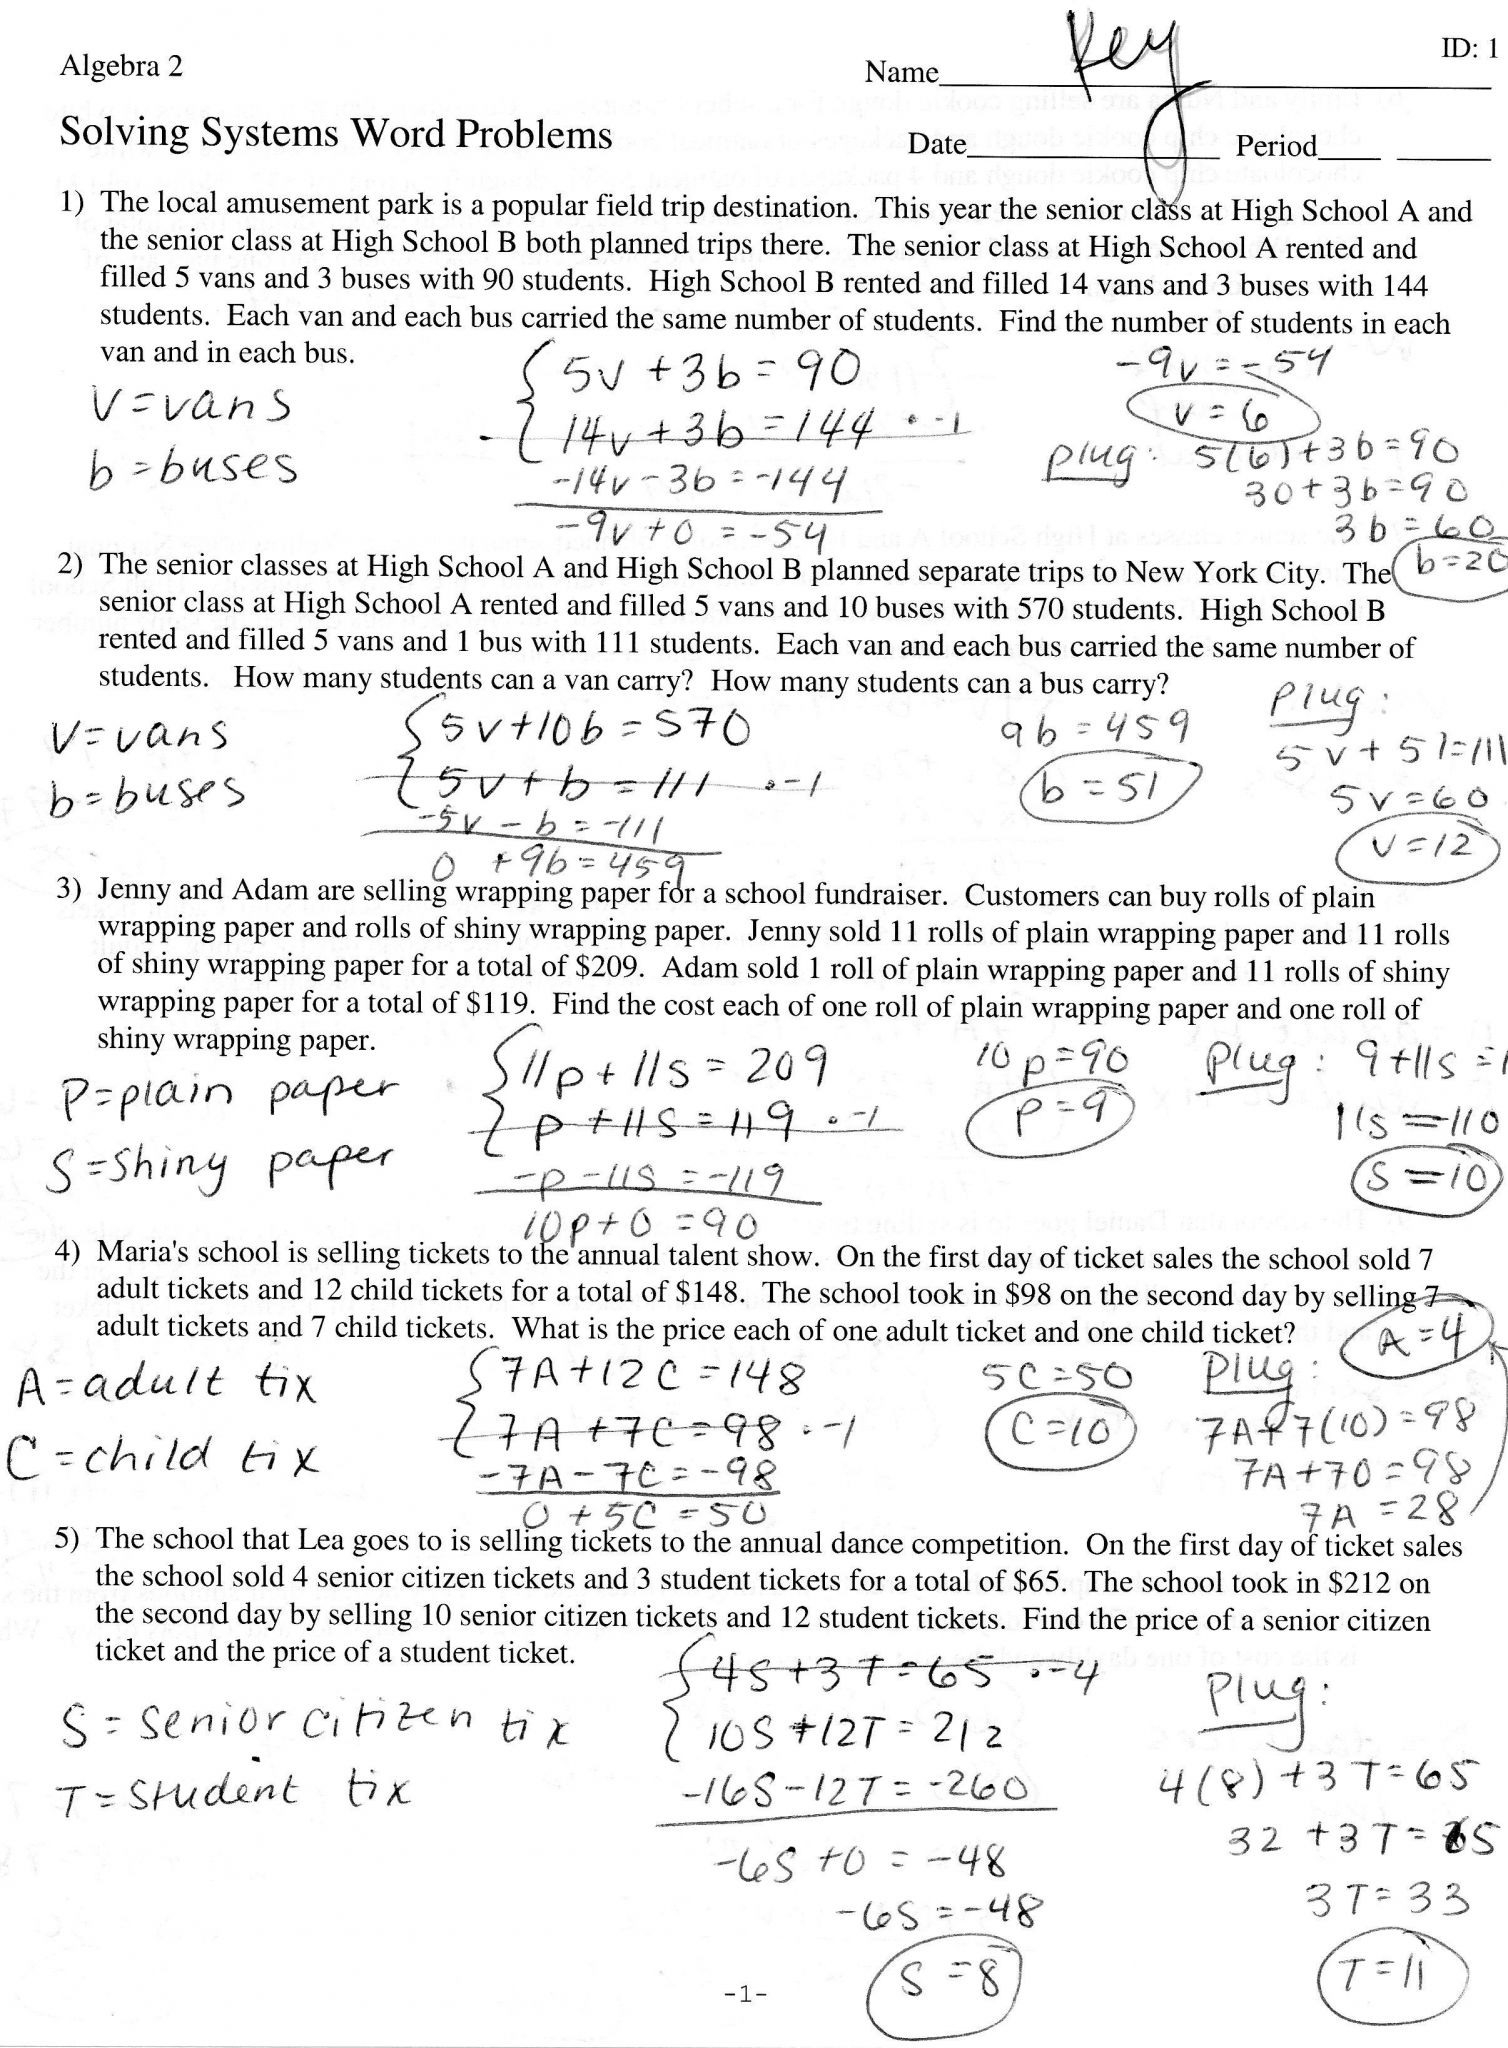 solving systems of equations word problems worksheet with answers